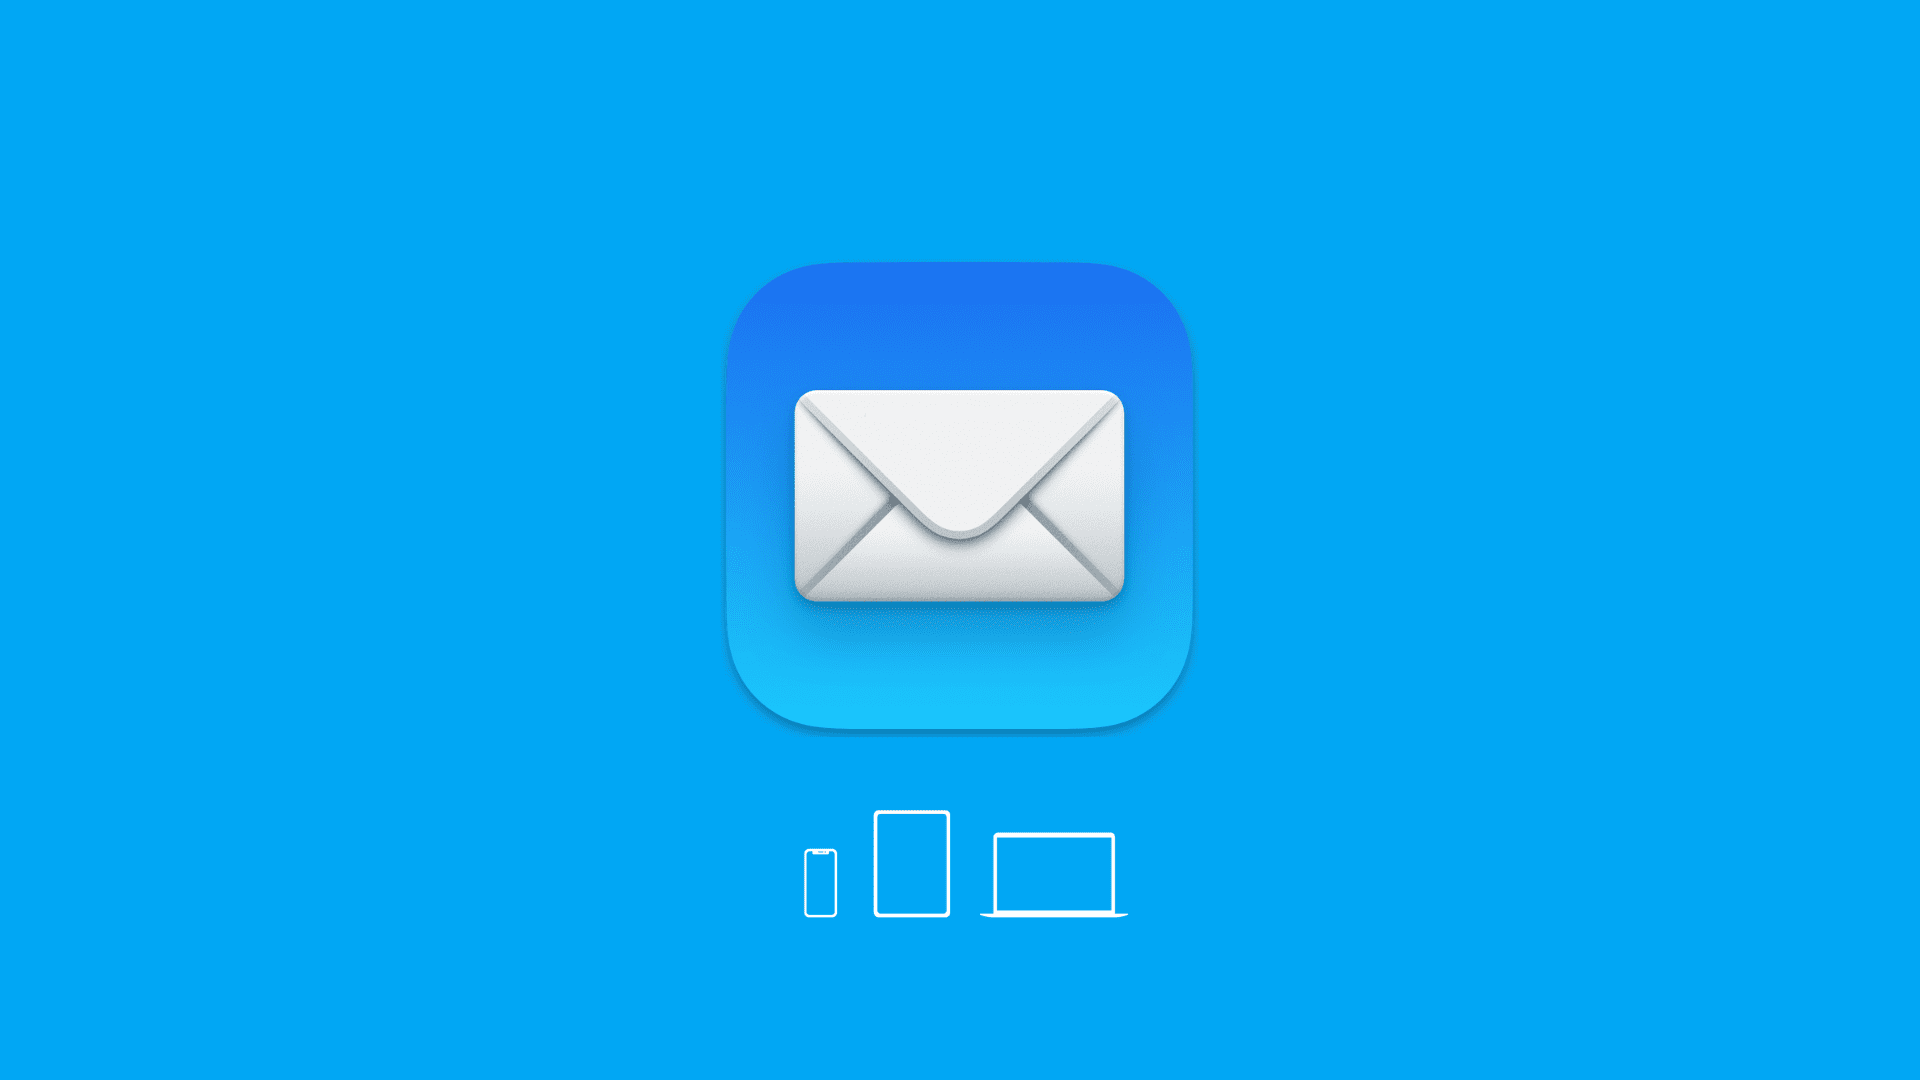 Mail app icon with tiny illustrations for iPhone, iPad, and MacBook